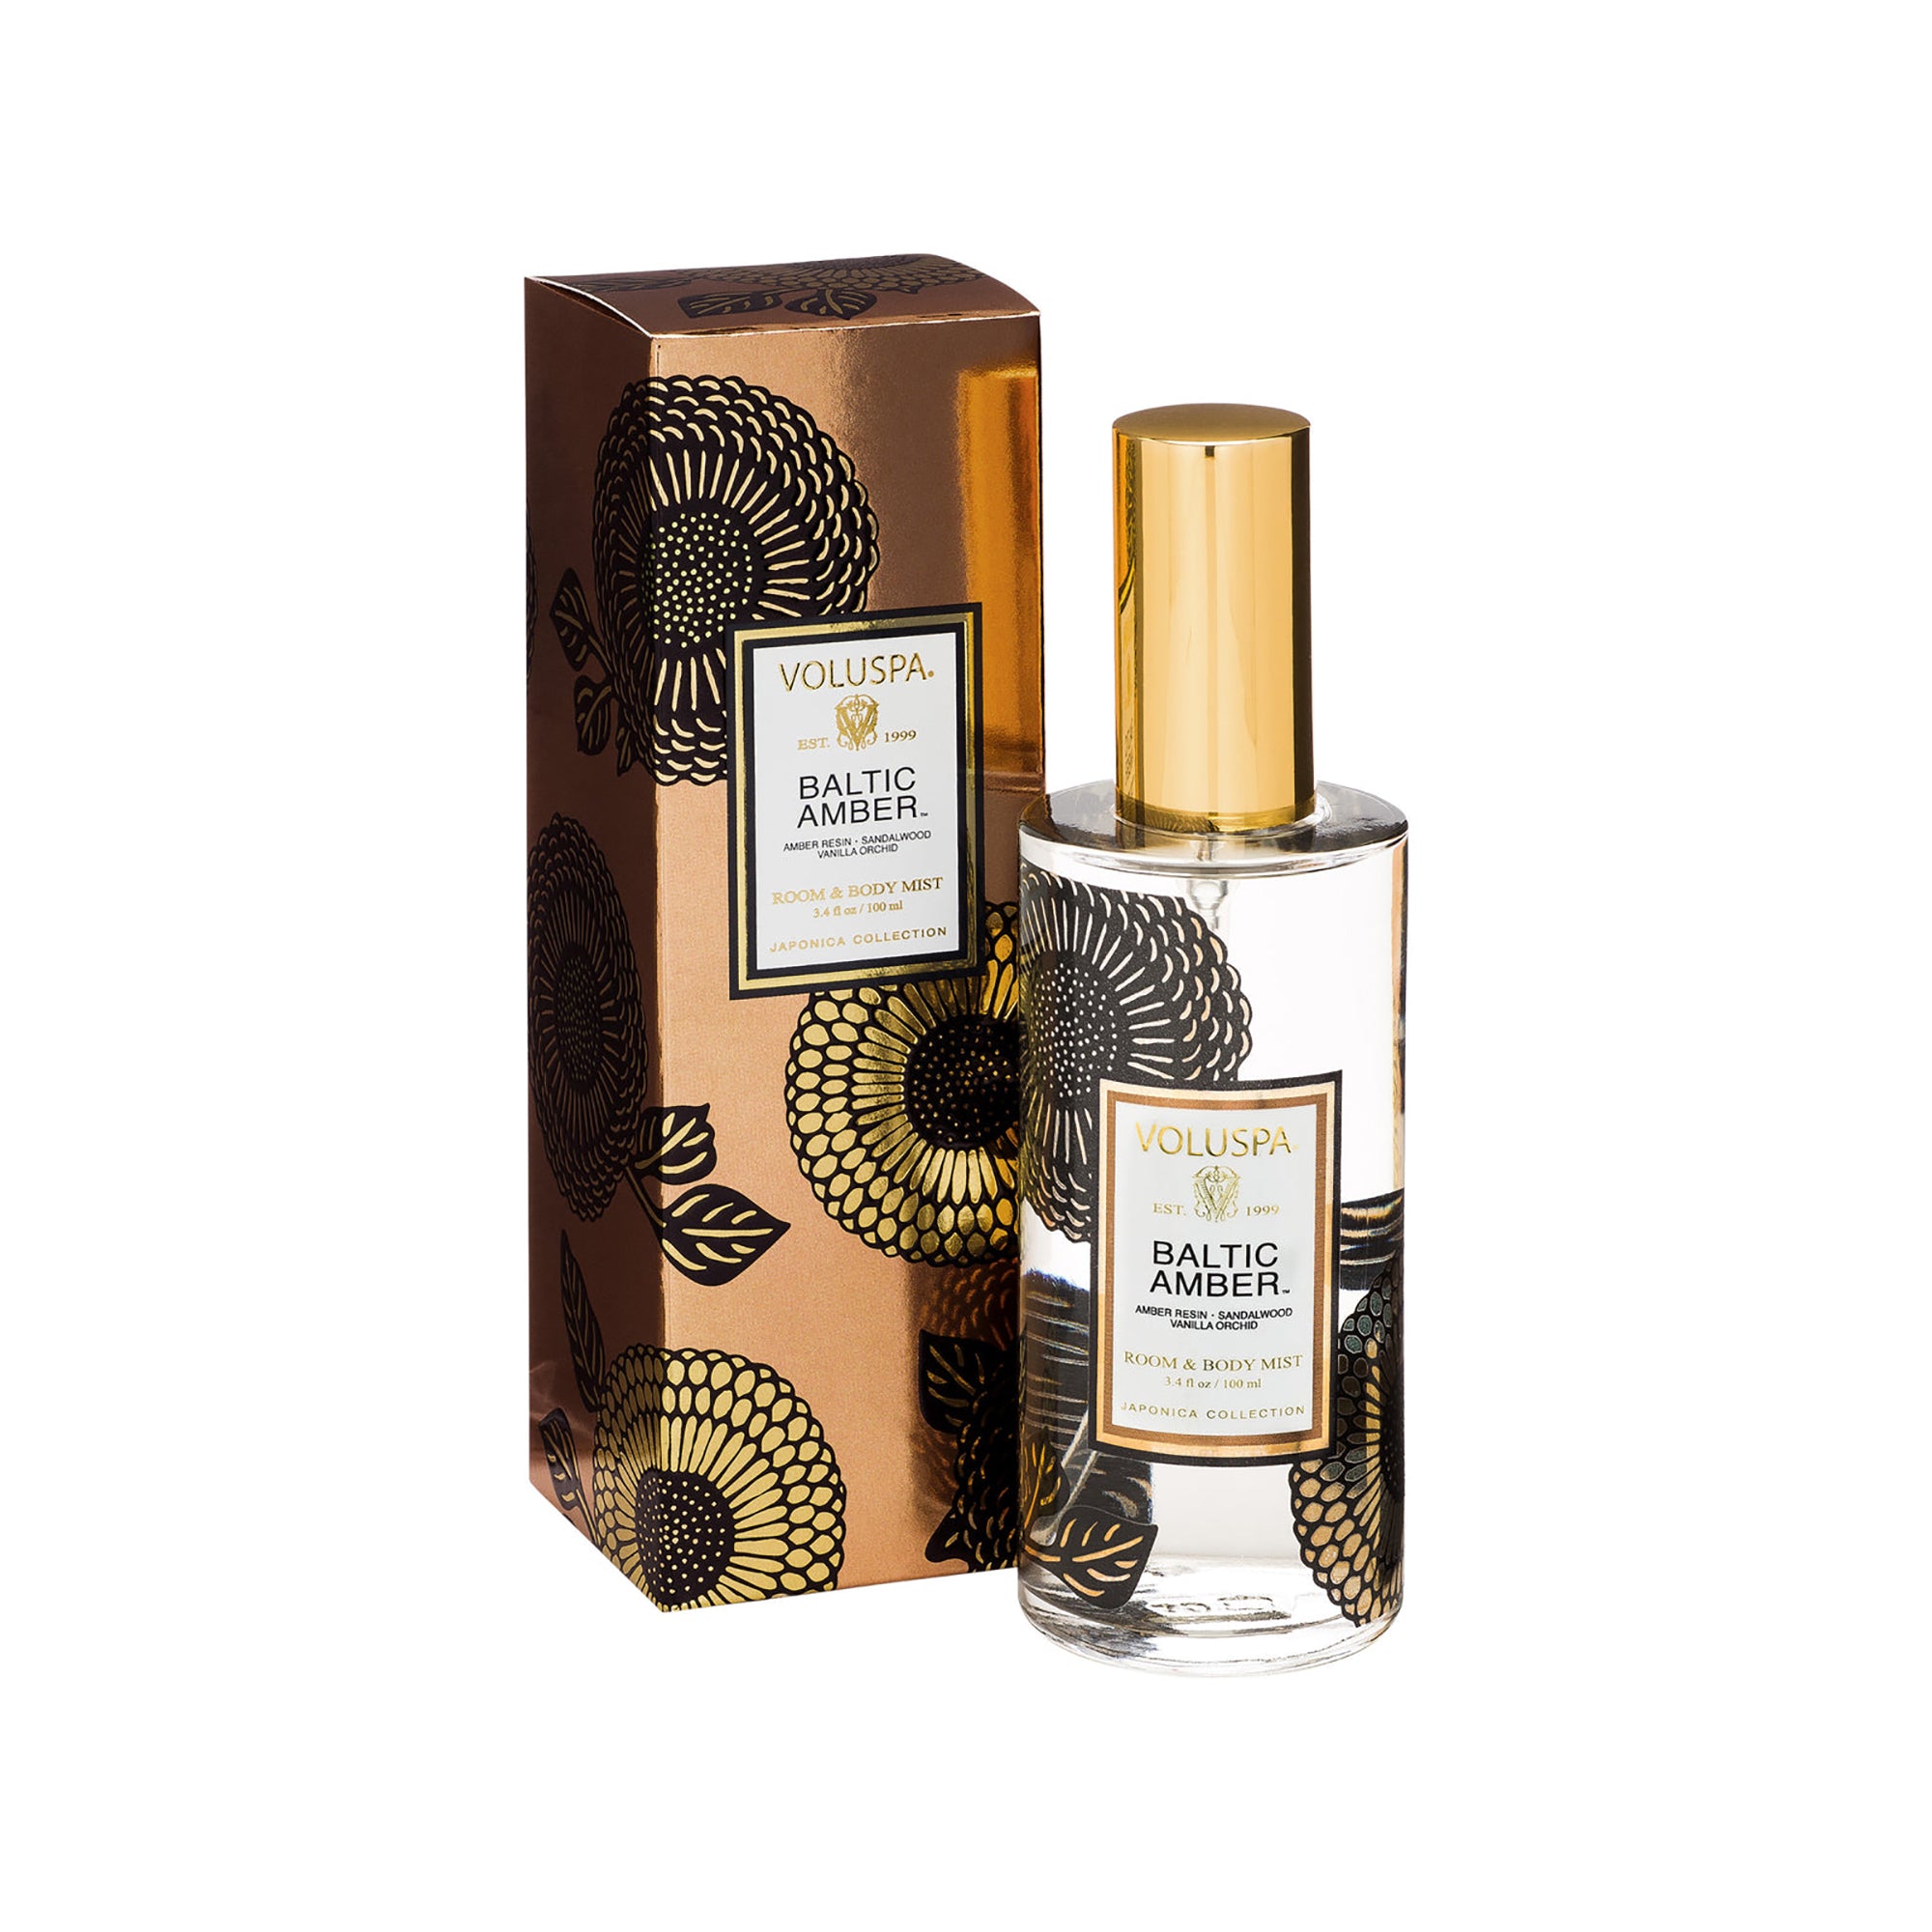 Voluspa Japonica Room and Body Mist / BALTIC AMBER